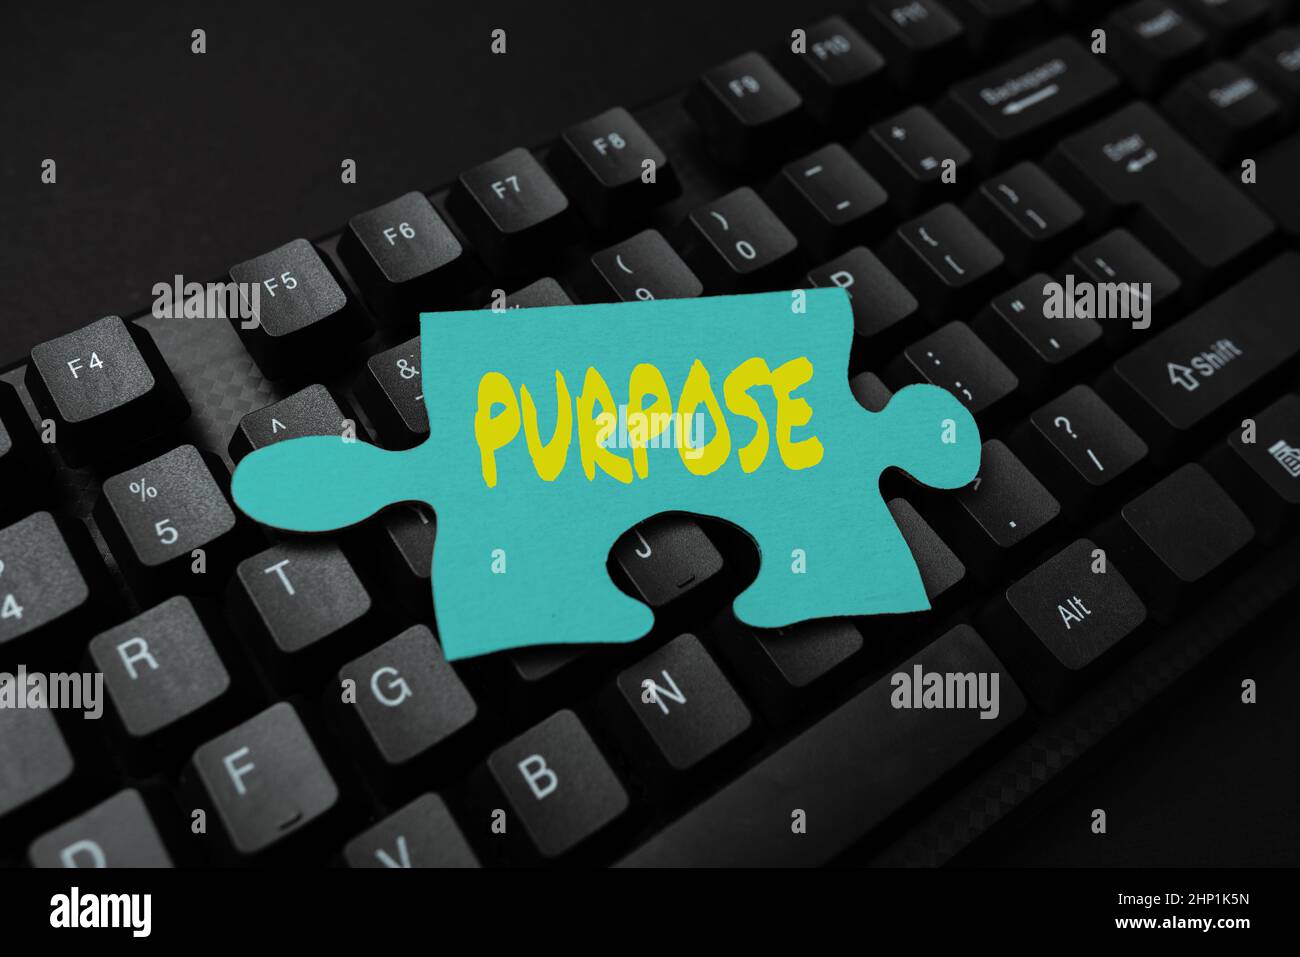 Text sign showing Purpose, Business approach The reason for which something is done or created and exists Setting Up New Online Blog Website, Typing M Stock Photo